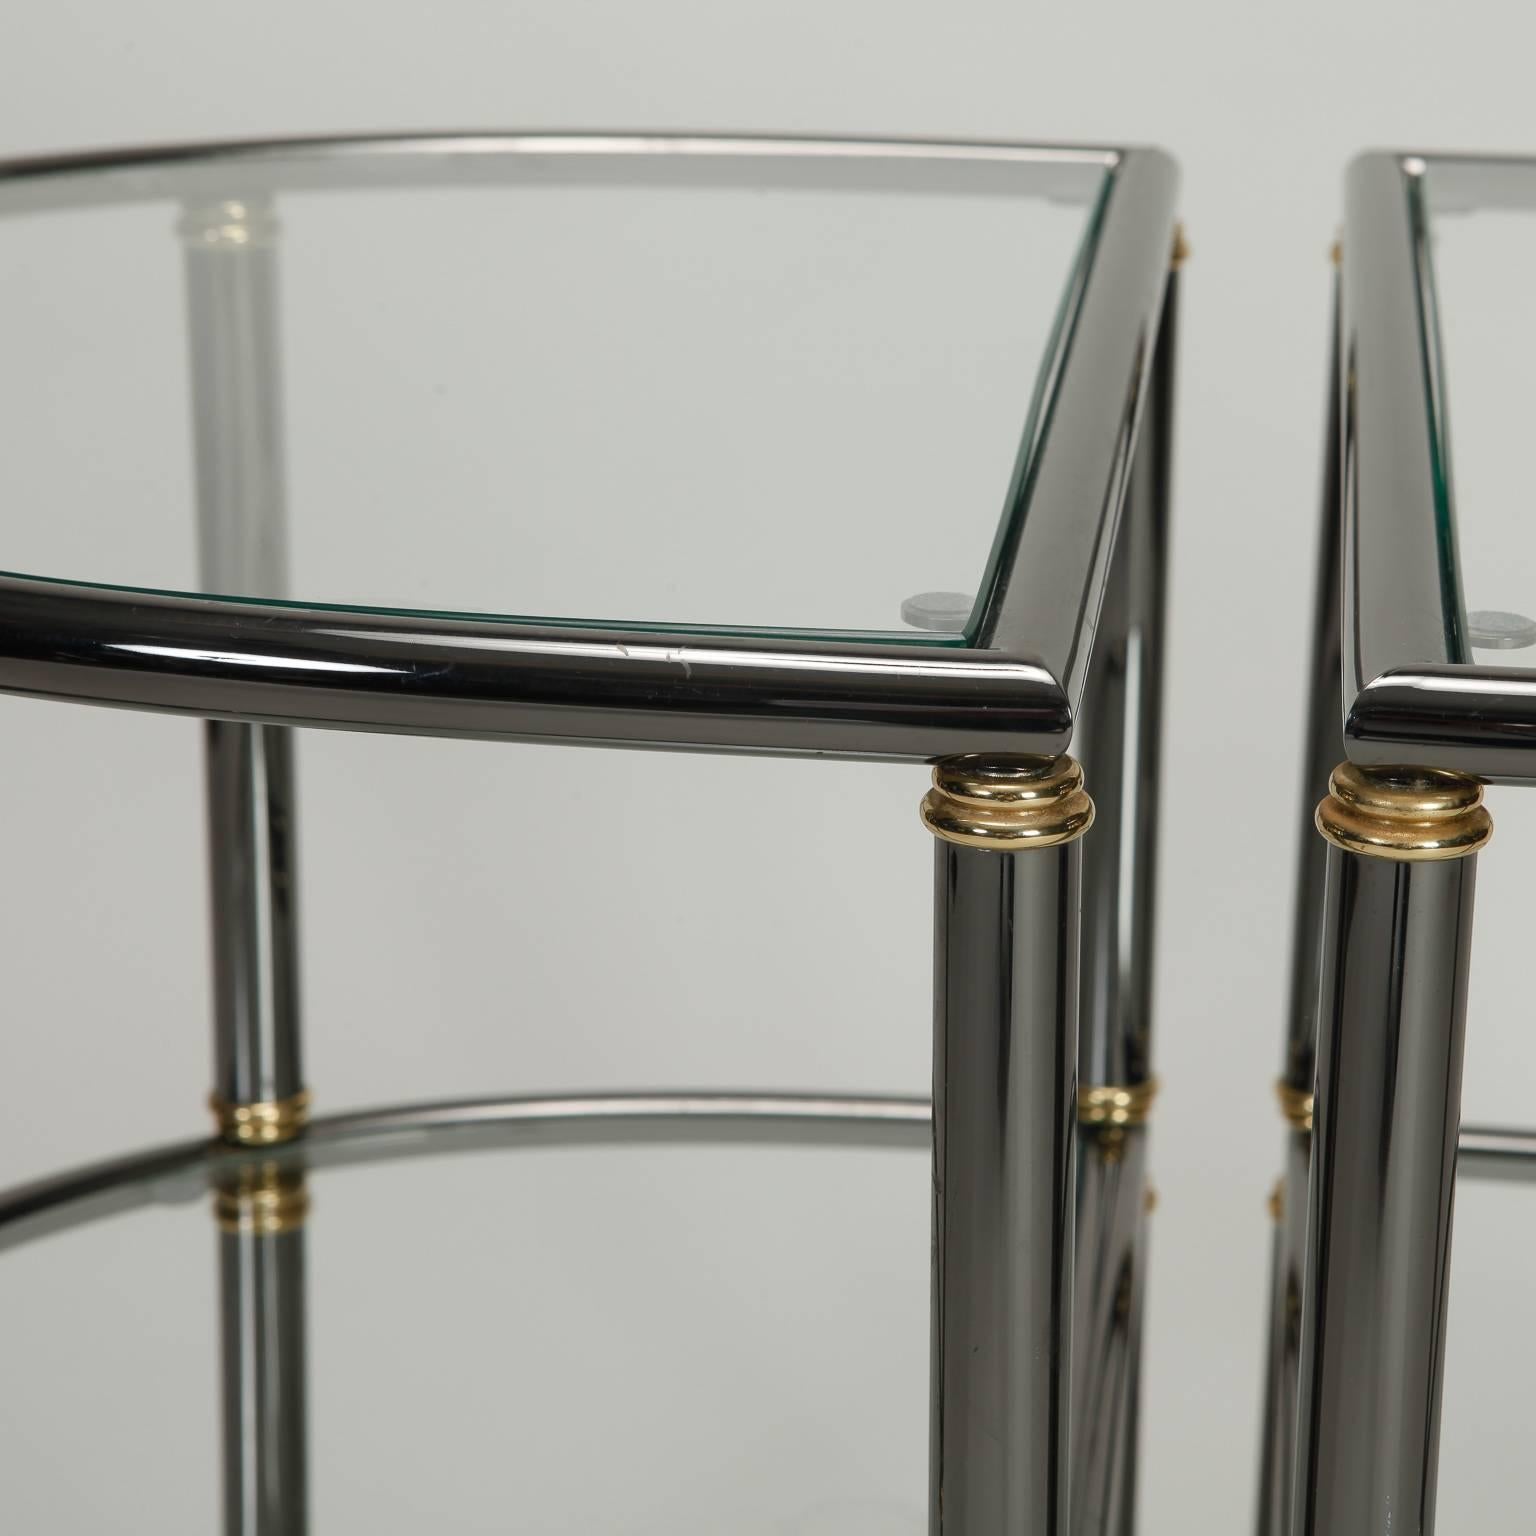 Pair of two-tier demilune side tables with gun metal tubular frames, brass accents and glass shelves, circa 1970s. Sold and priced as a pair.
 